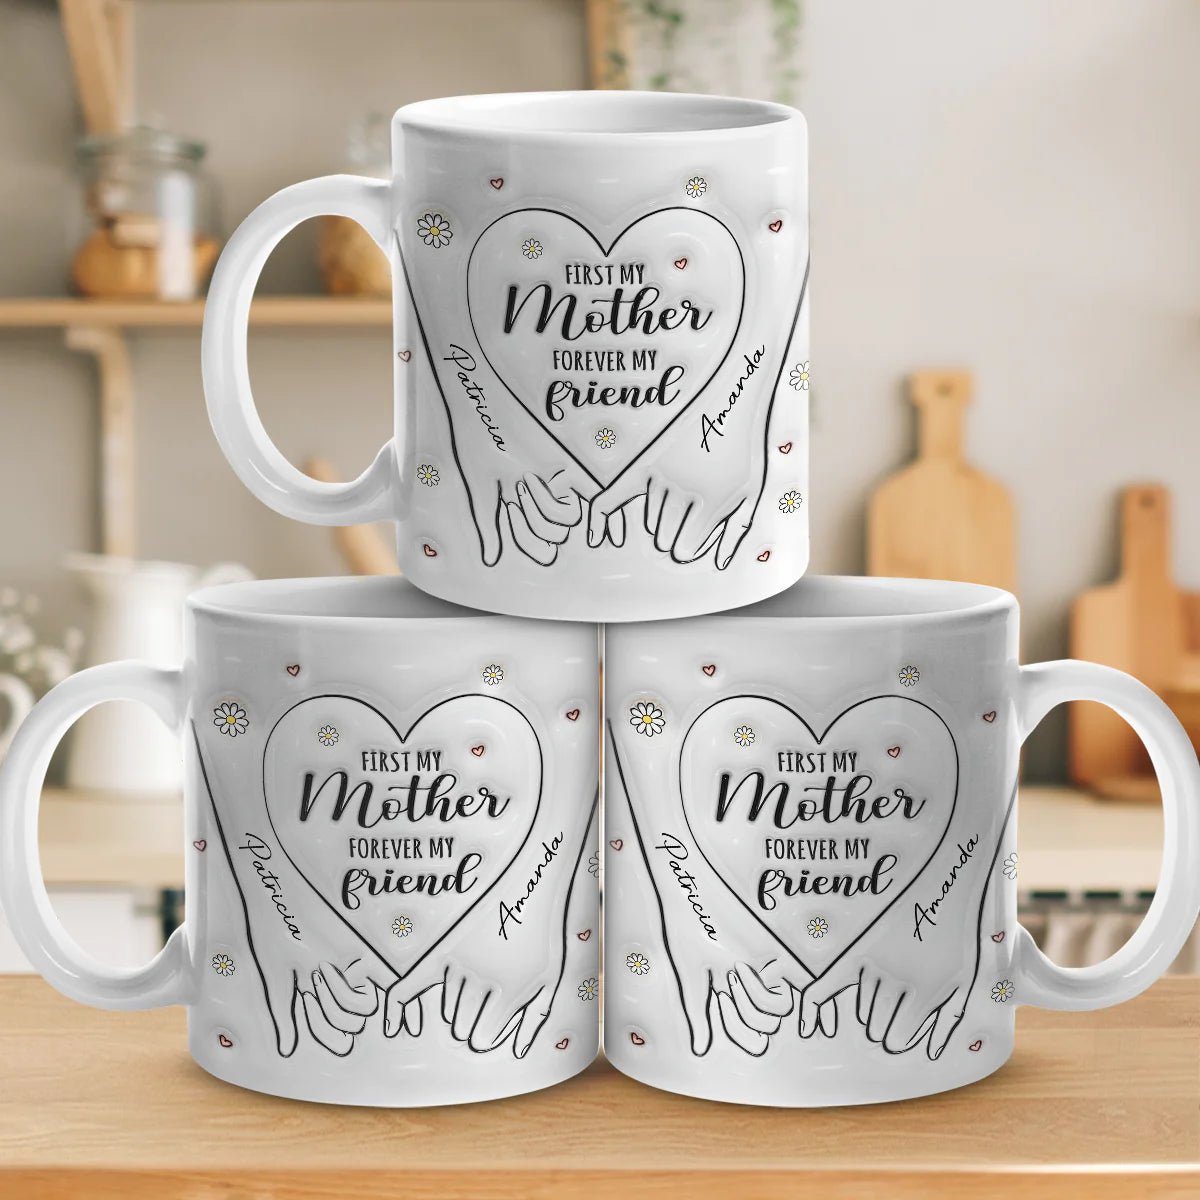 Family - First My Mother Forever My Friend - Personalized Mug (NV) - The Next Custom Gift